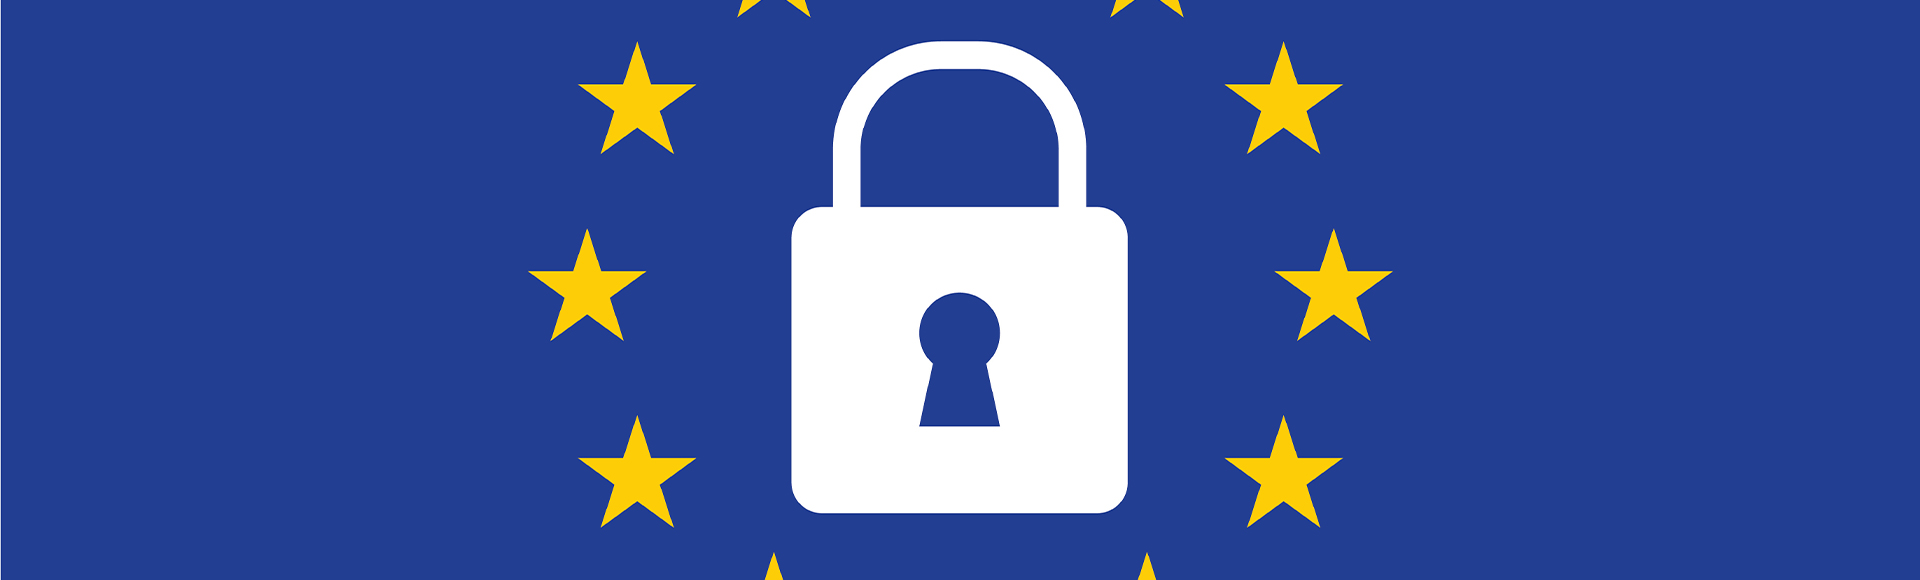 Assessing M&A Risk through GDPR Due Diligence